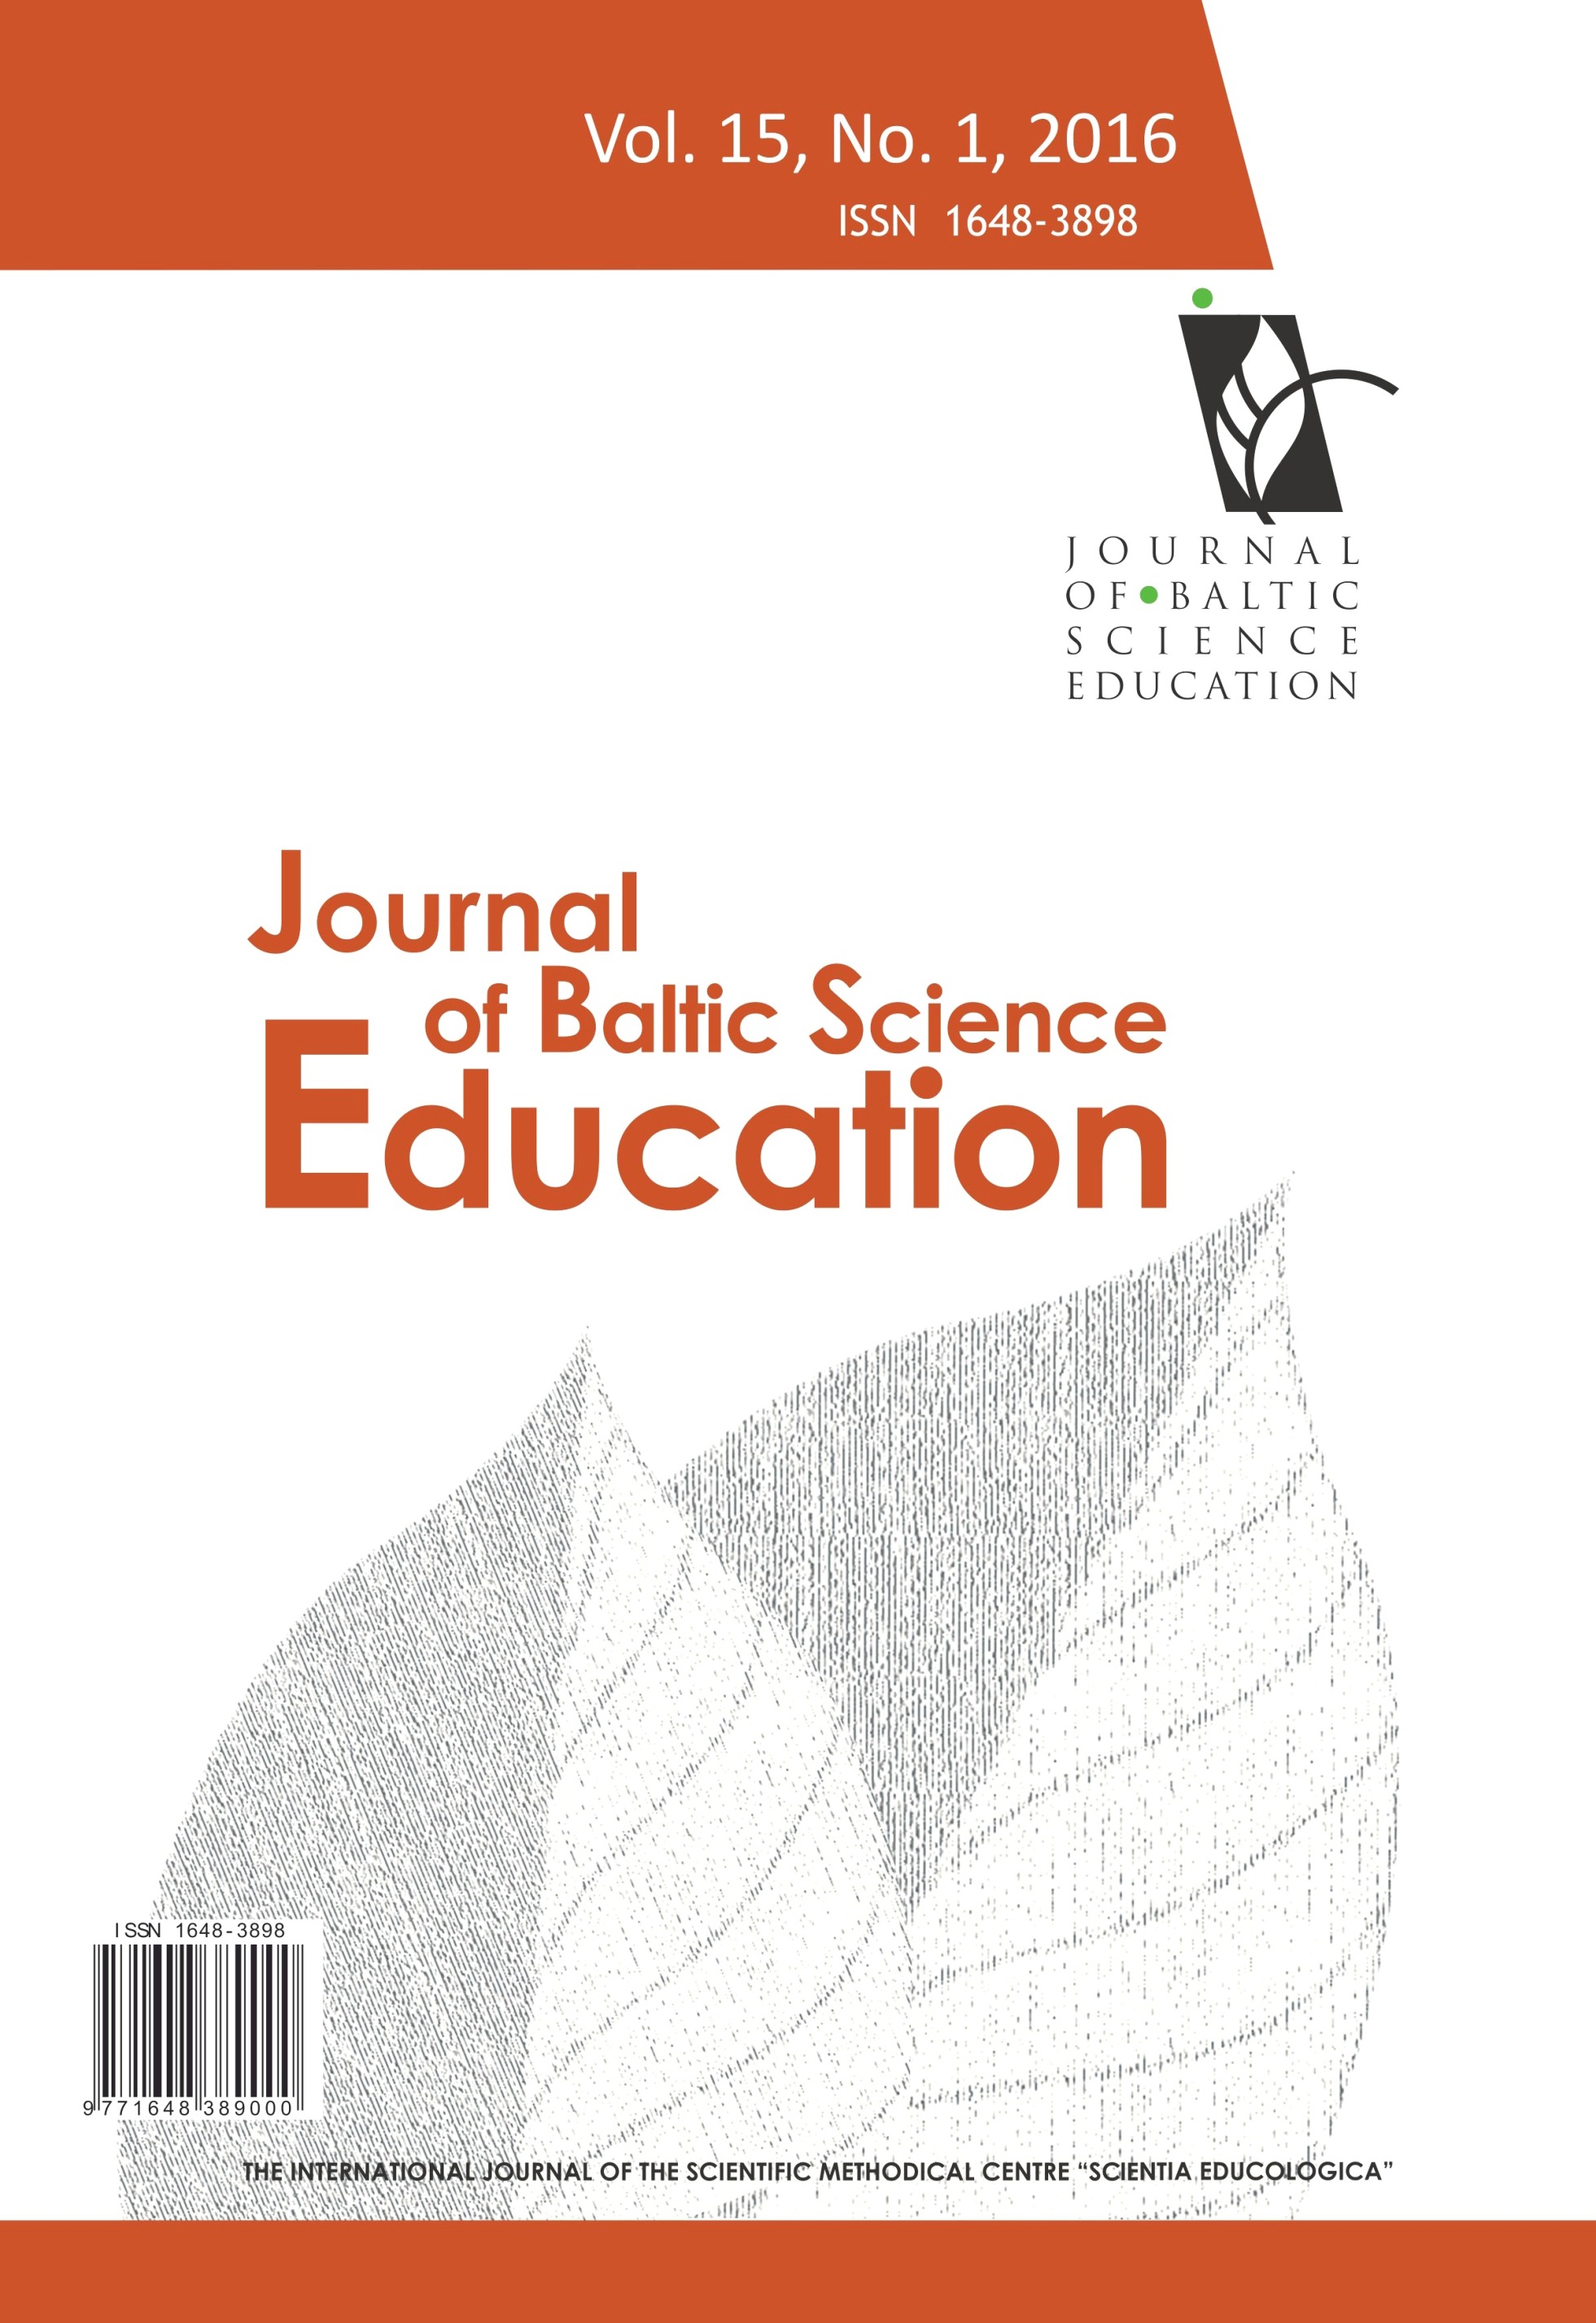 PRE-SERVICE SCIENCE TEACHERS' PERCEPTIONS AND ATTITUDES ABOUT THE USE OF MODELS